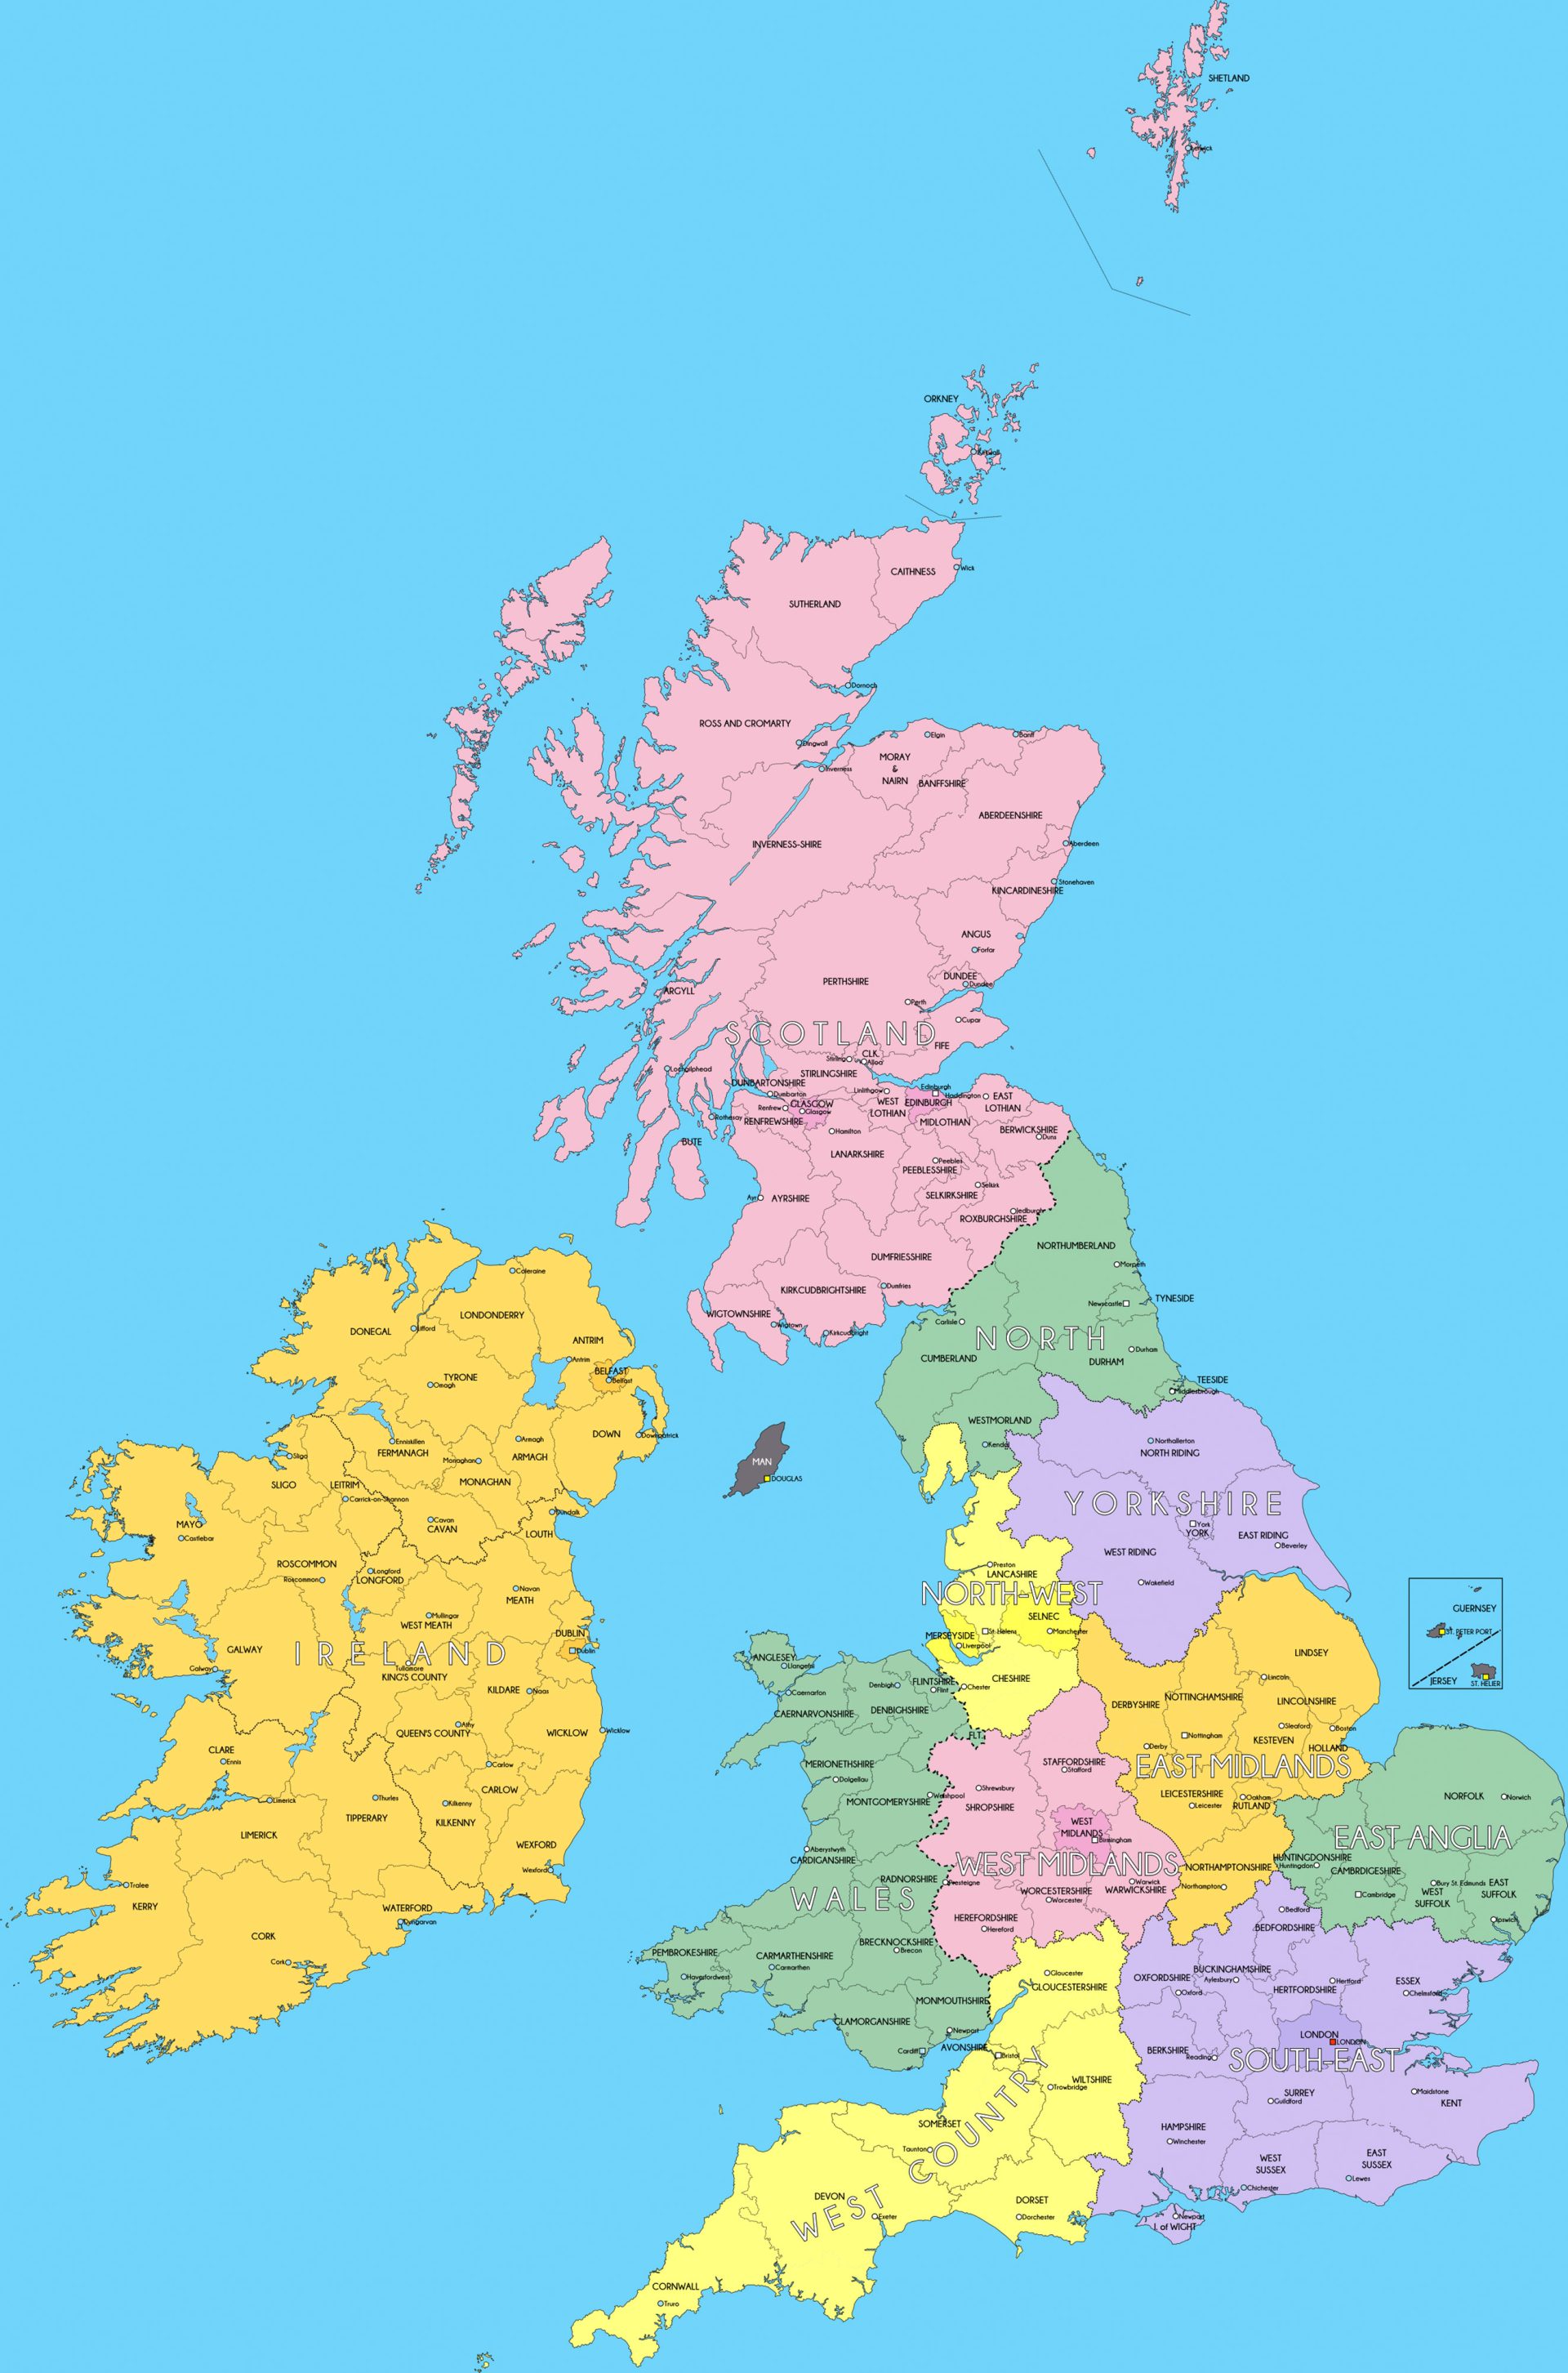 A Collection of United Kingdom Maps: A Comprehensive Atlas - Guide of ...